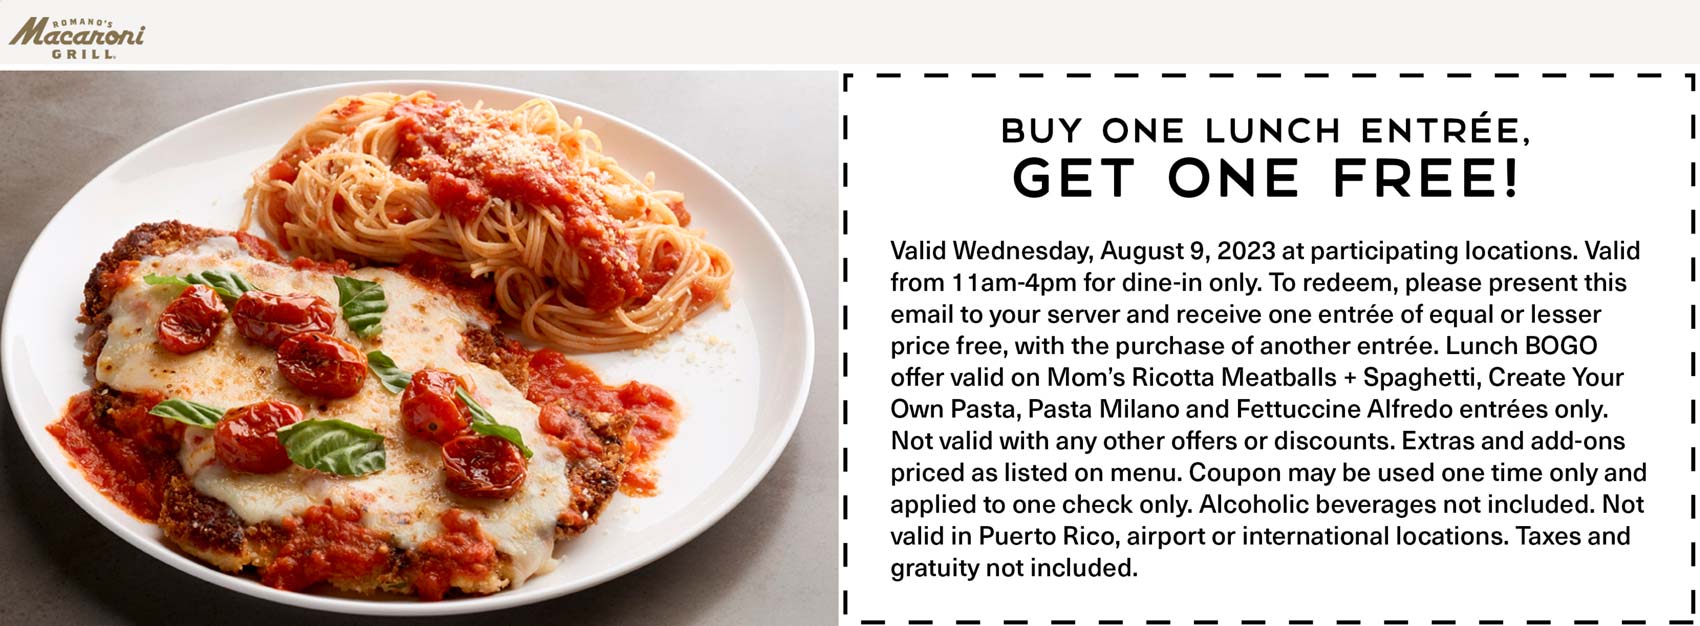 Macaroni Grill restaurants Coupon  Second lunch free Wednesday at Macaroni Grill #macaronigrill 